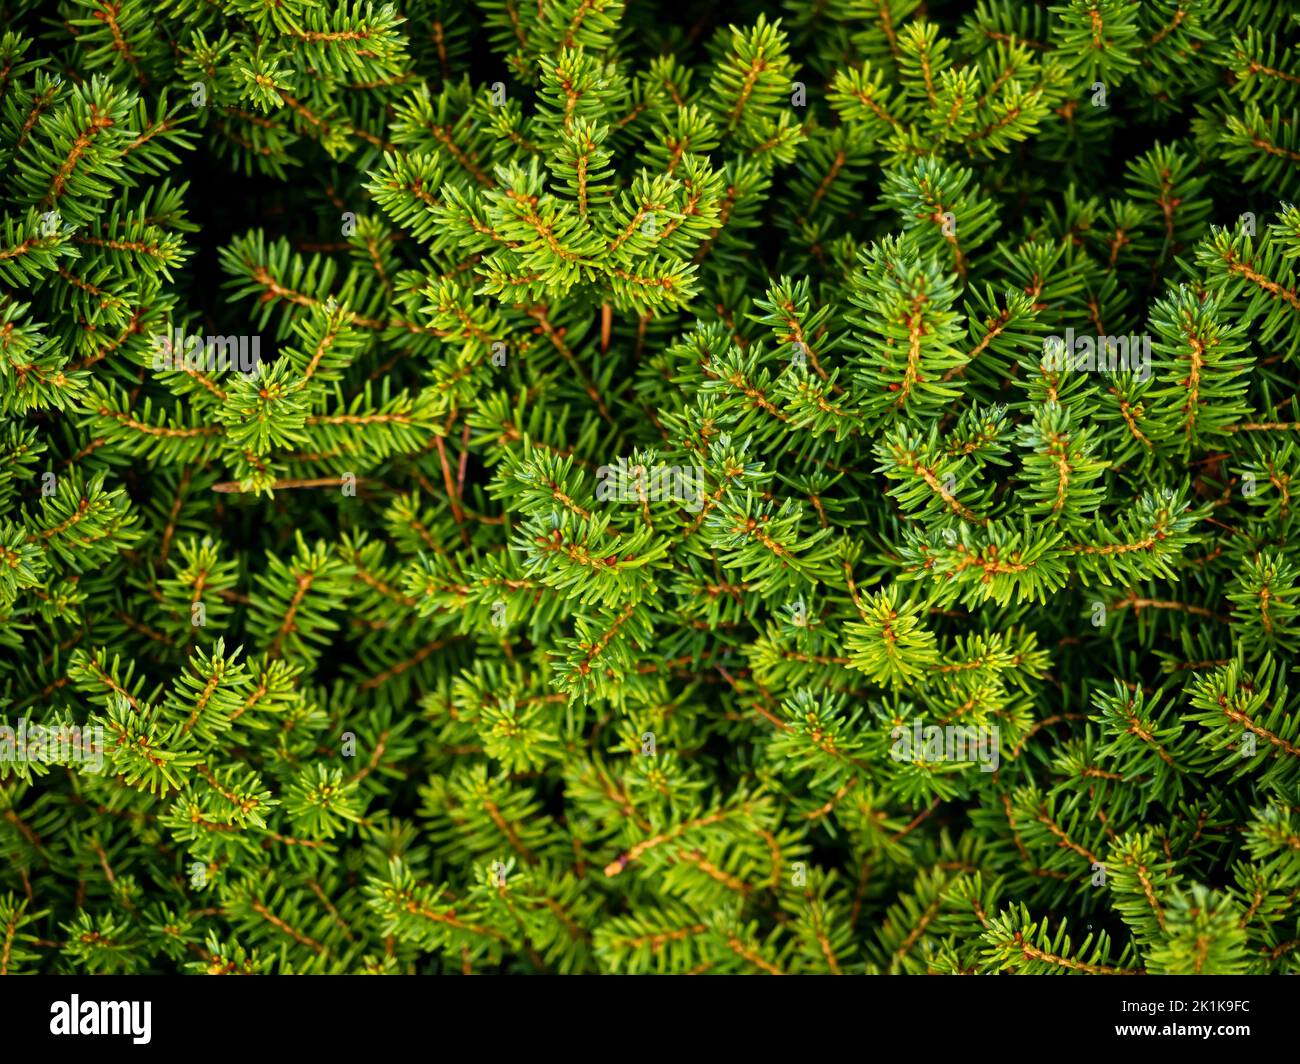 The mugo pine plant in a outdoor garden, close up photo, natural background Stock Photo